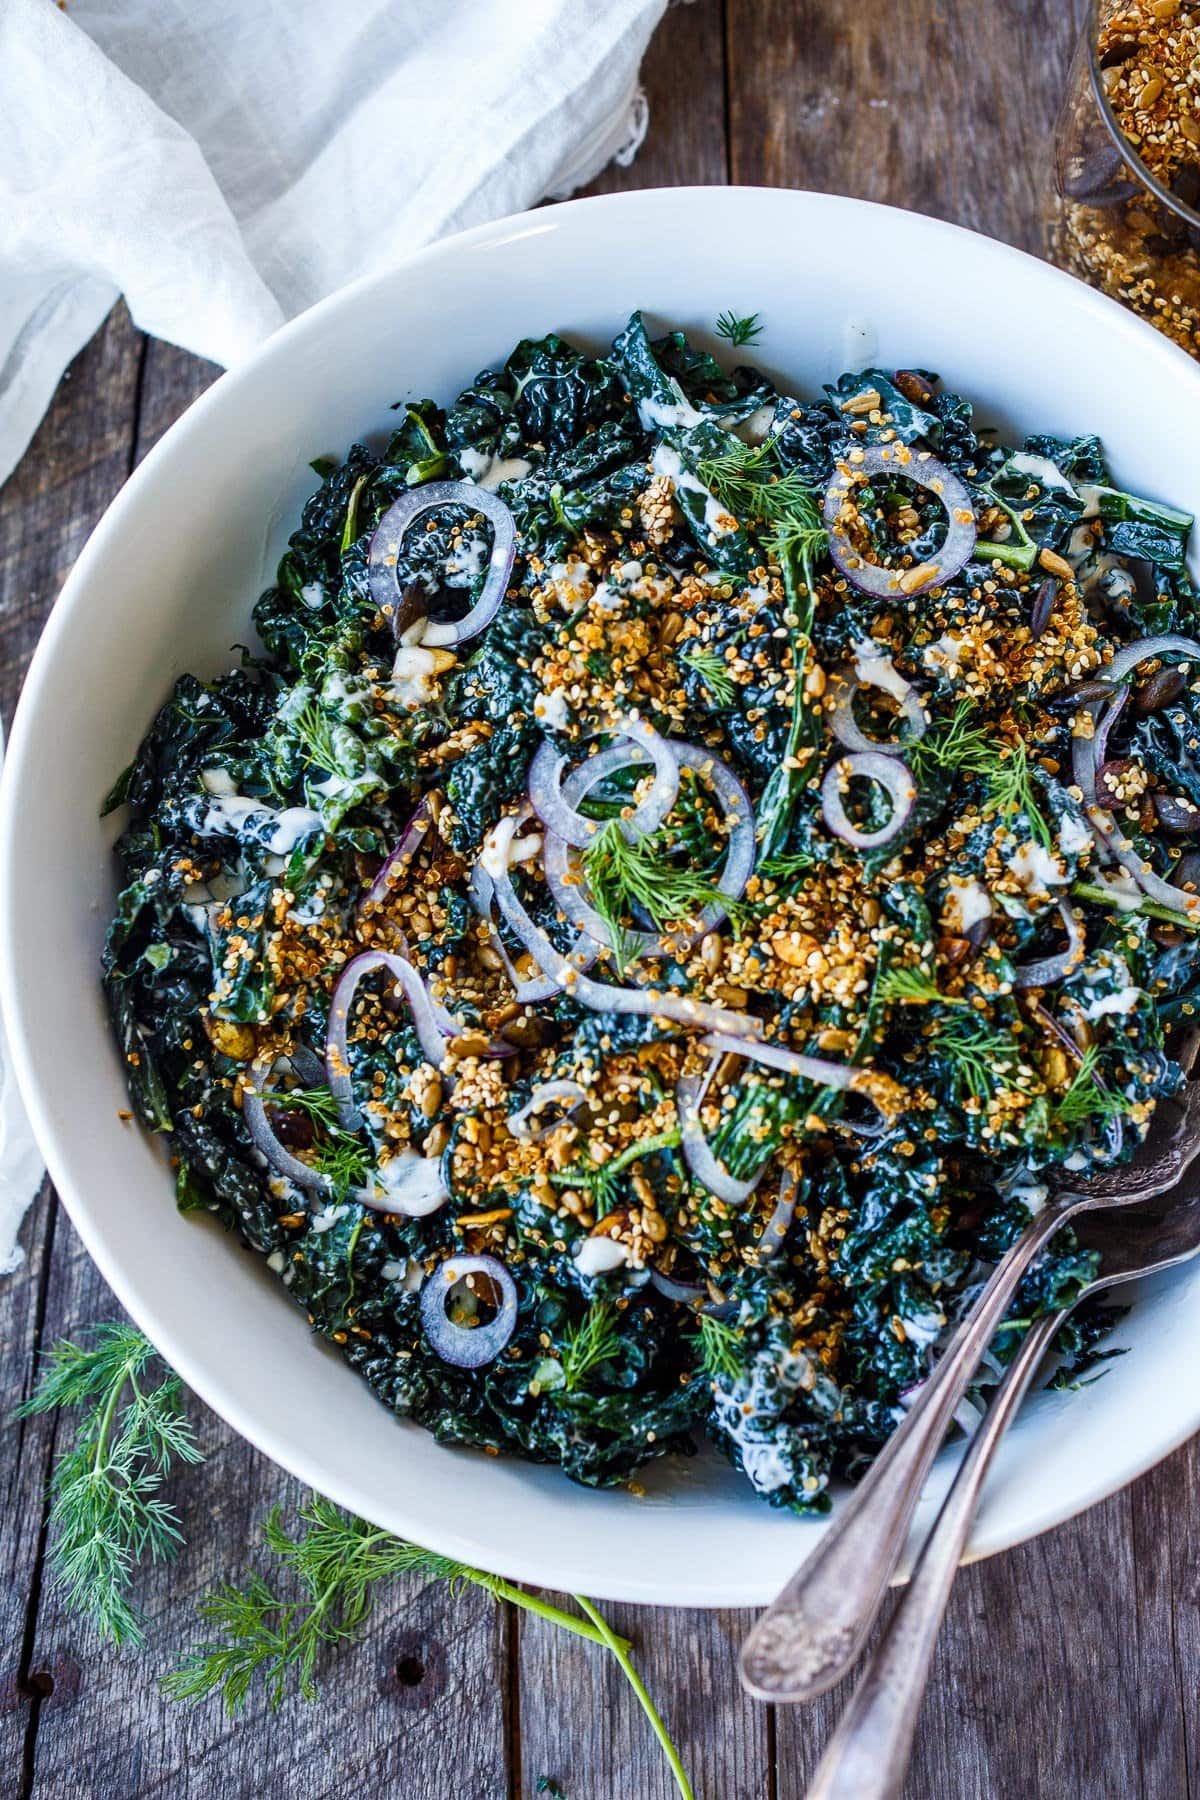 Full of healthy texture and flavor, this nutrient-dense Kale Salad is enhanced with creamy buttermilk dressing, tamed red onions and topped with an addicting crunchy quinoa salad topper.